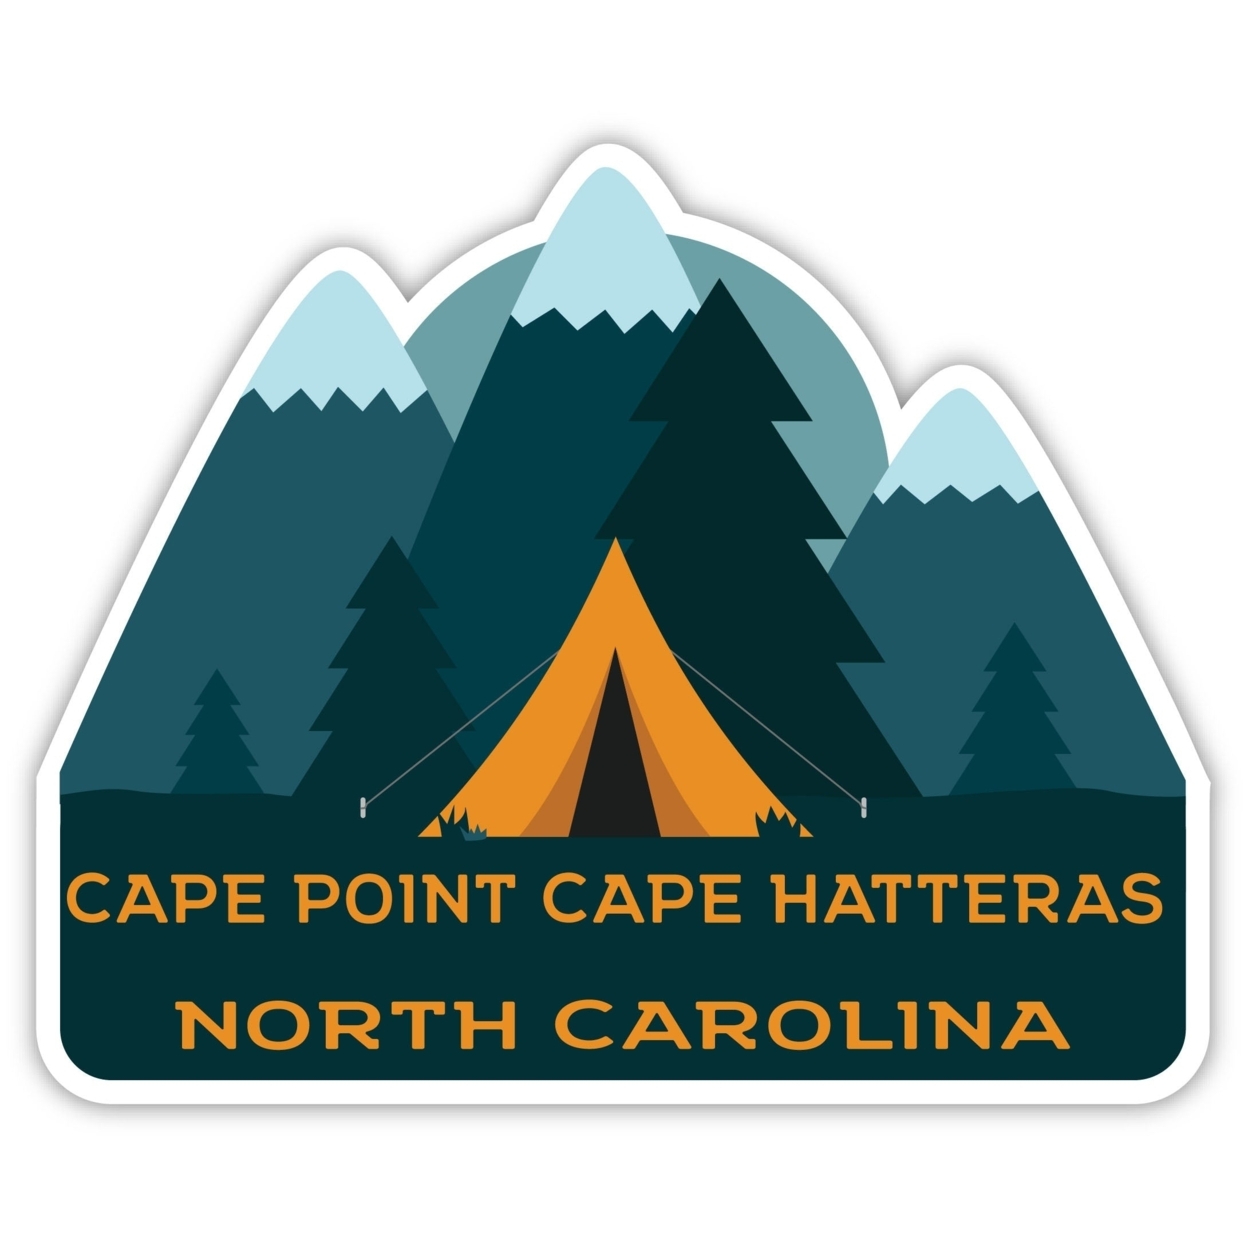 Cape Point Cape Hatteras North Carolina Souvenir Decorative Stickers (Choose Theme And Size) - 4-Pack, 2-Inch, Tent